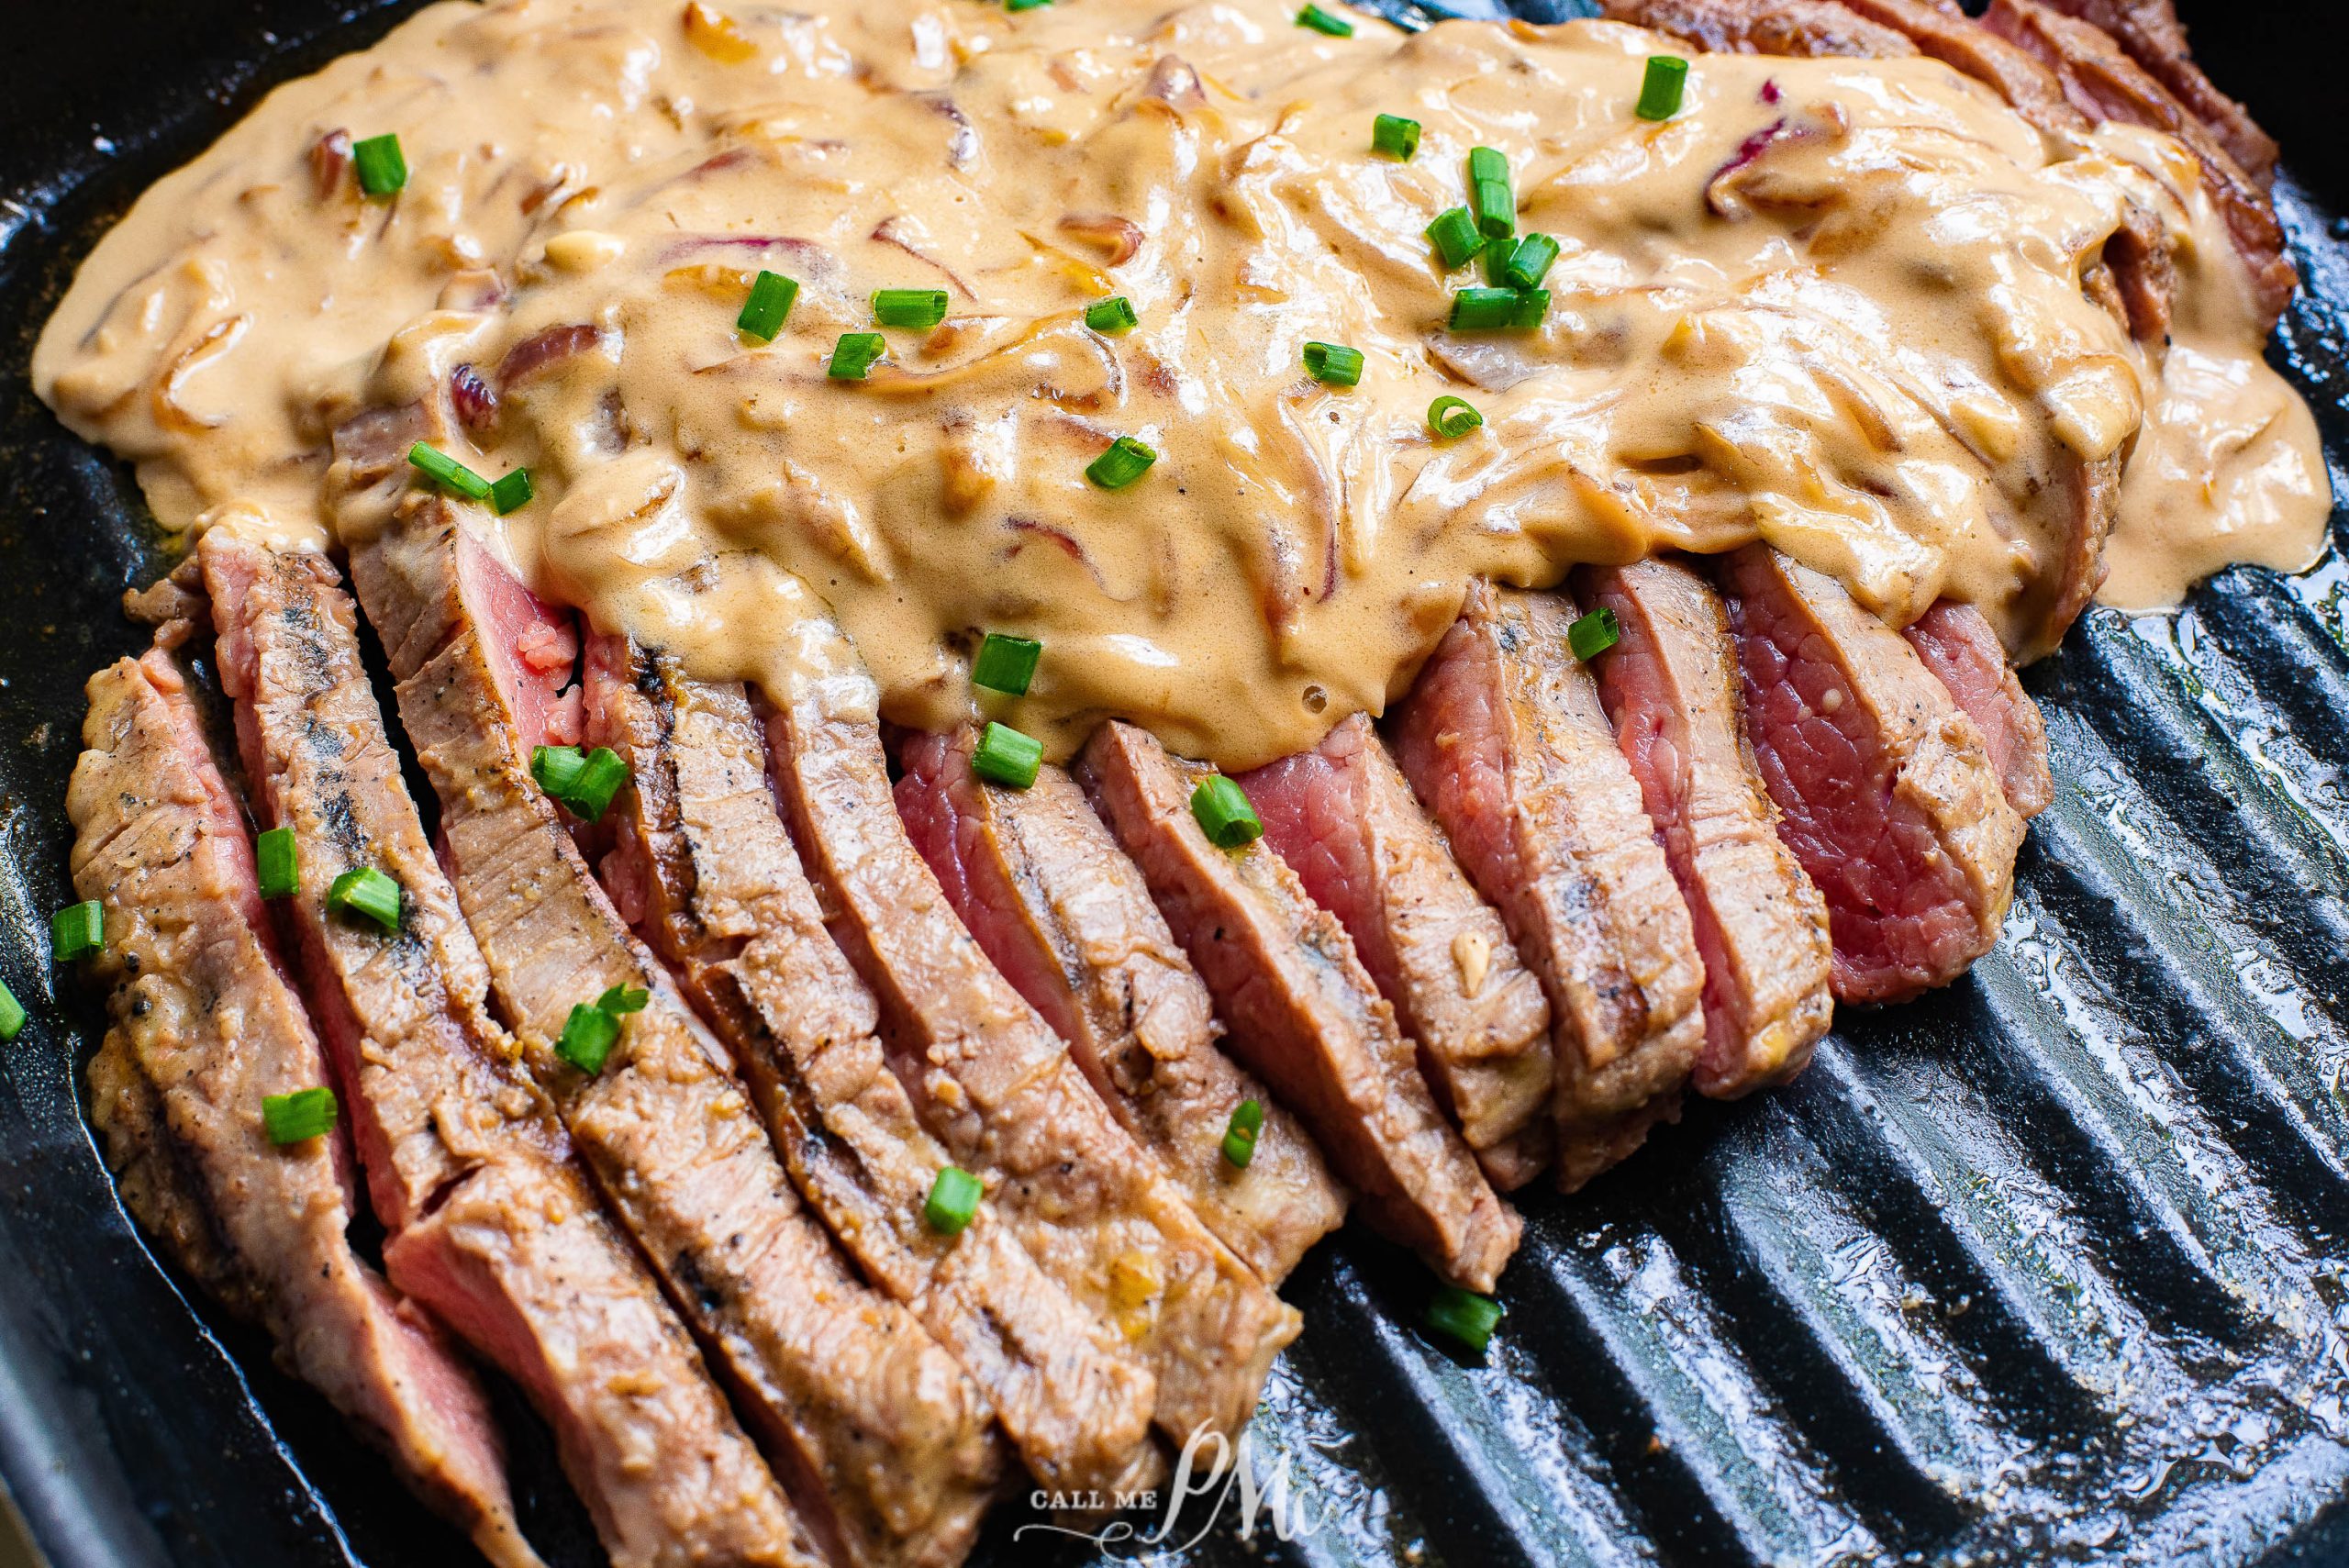 Ribeye with Feta Gravy, A steak on a grill with a sauce on it.